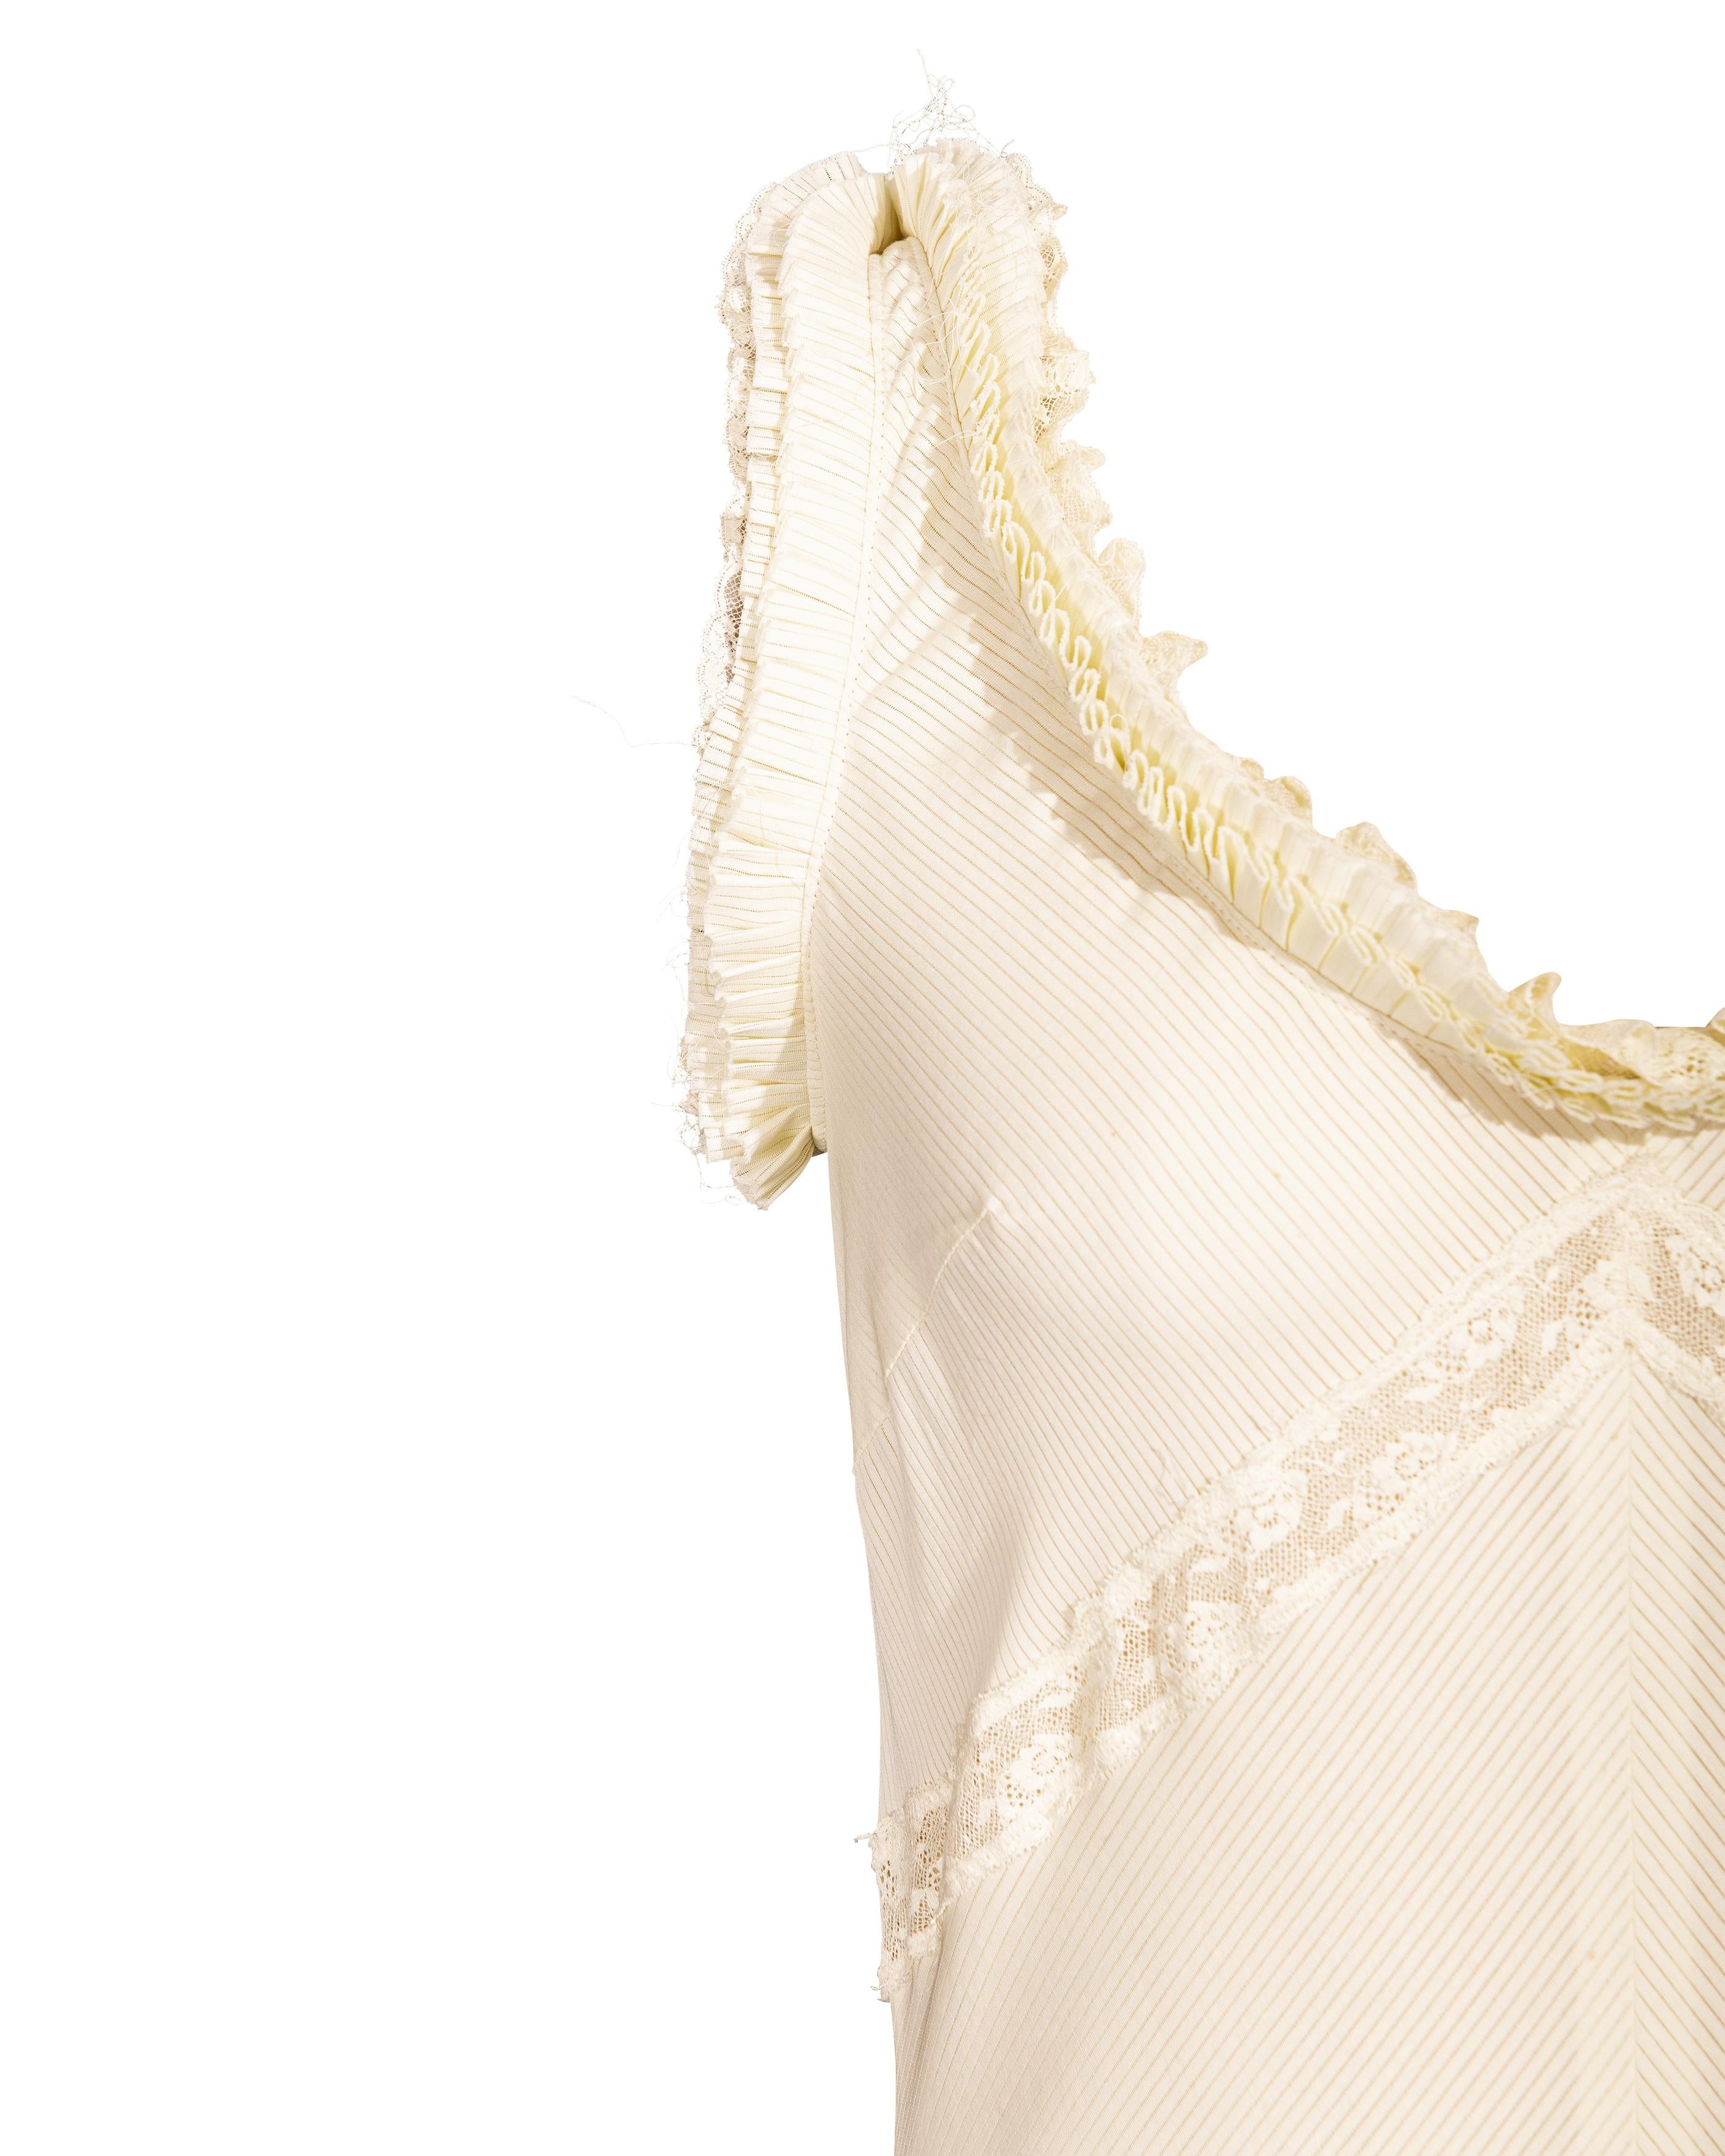 S/S 2005 Alexander McQueen (Lifetime) Pale Yellow Pleated and Lace Cotton Dress 4